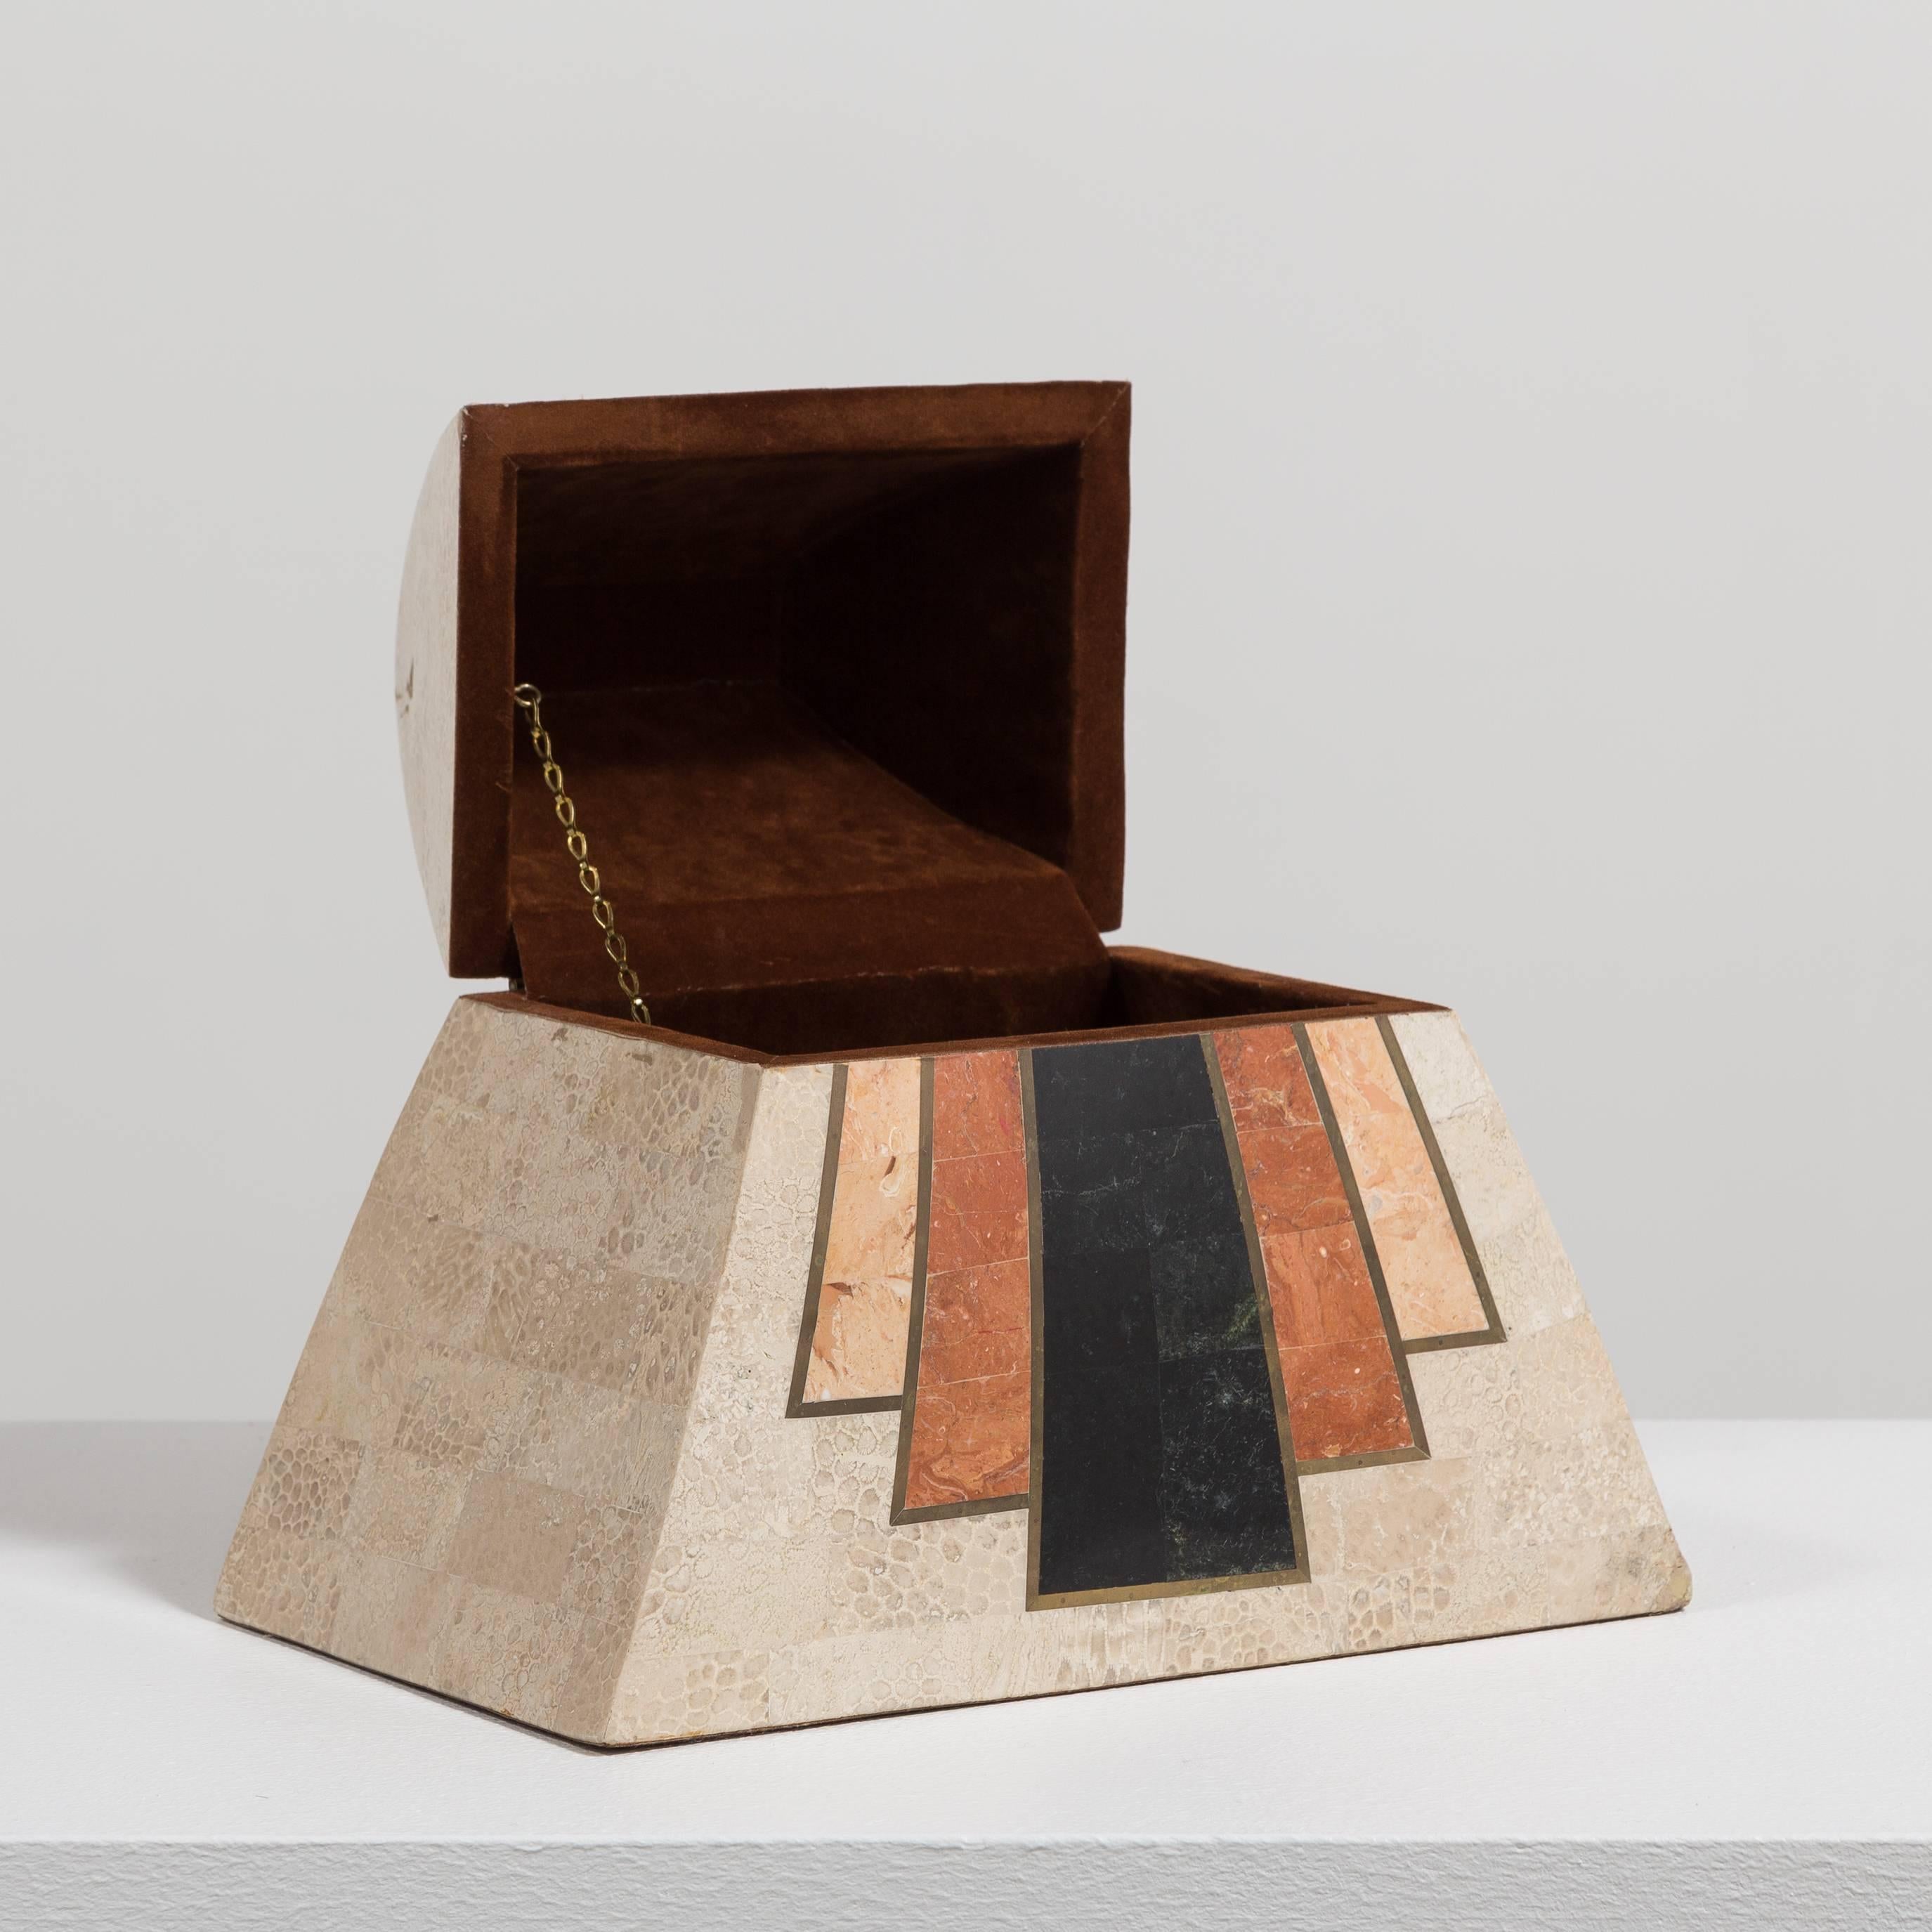 A Maitland Smith tessellated stone veneered box, 1980s.
label underneath MADE IN THE PHILIPPINES 

 